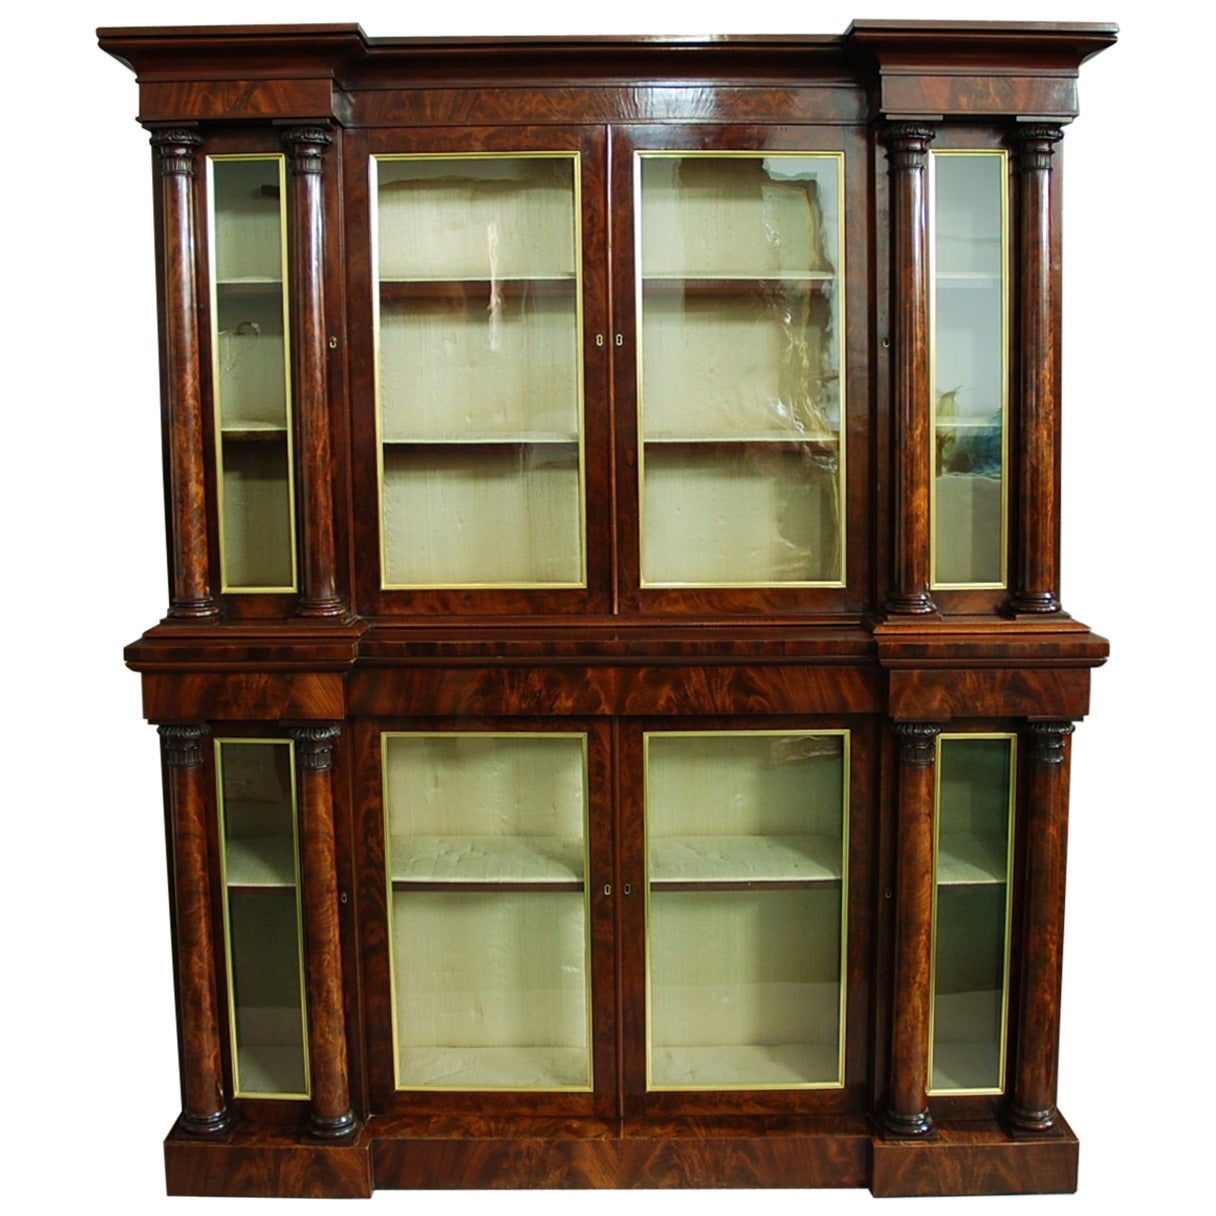 William IV Mahogany Inverted Breakfront Bookcase of Small Proportions